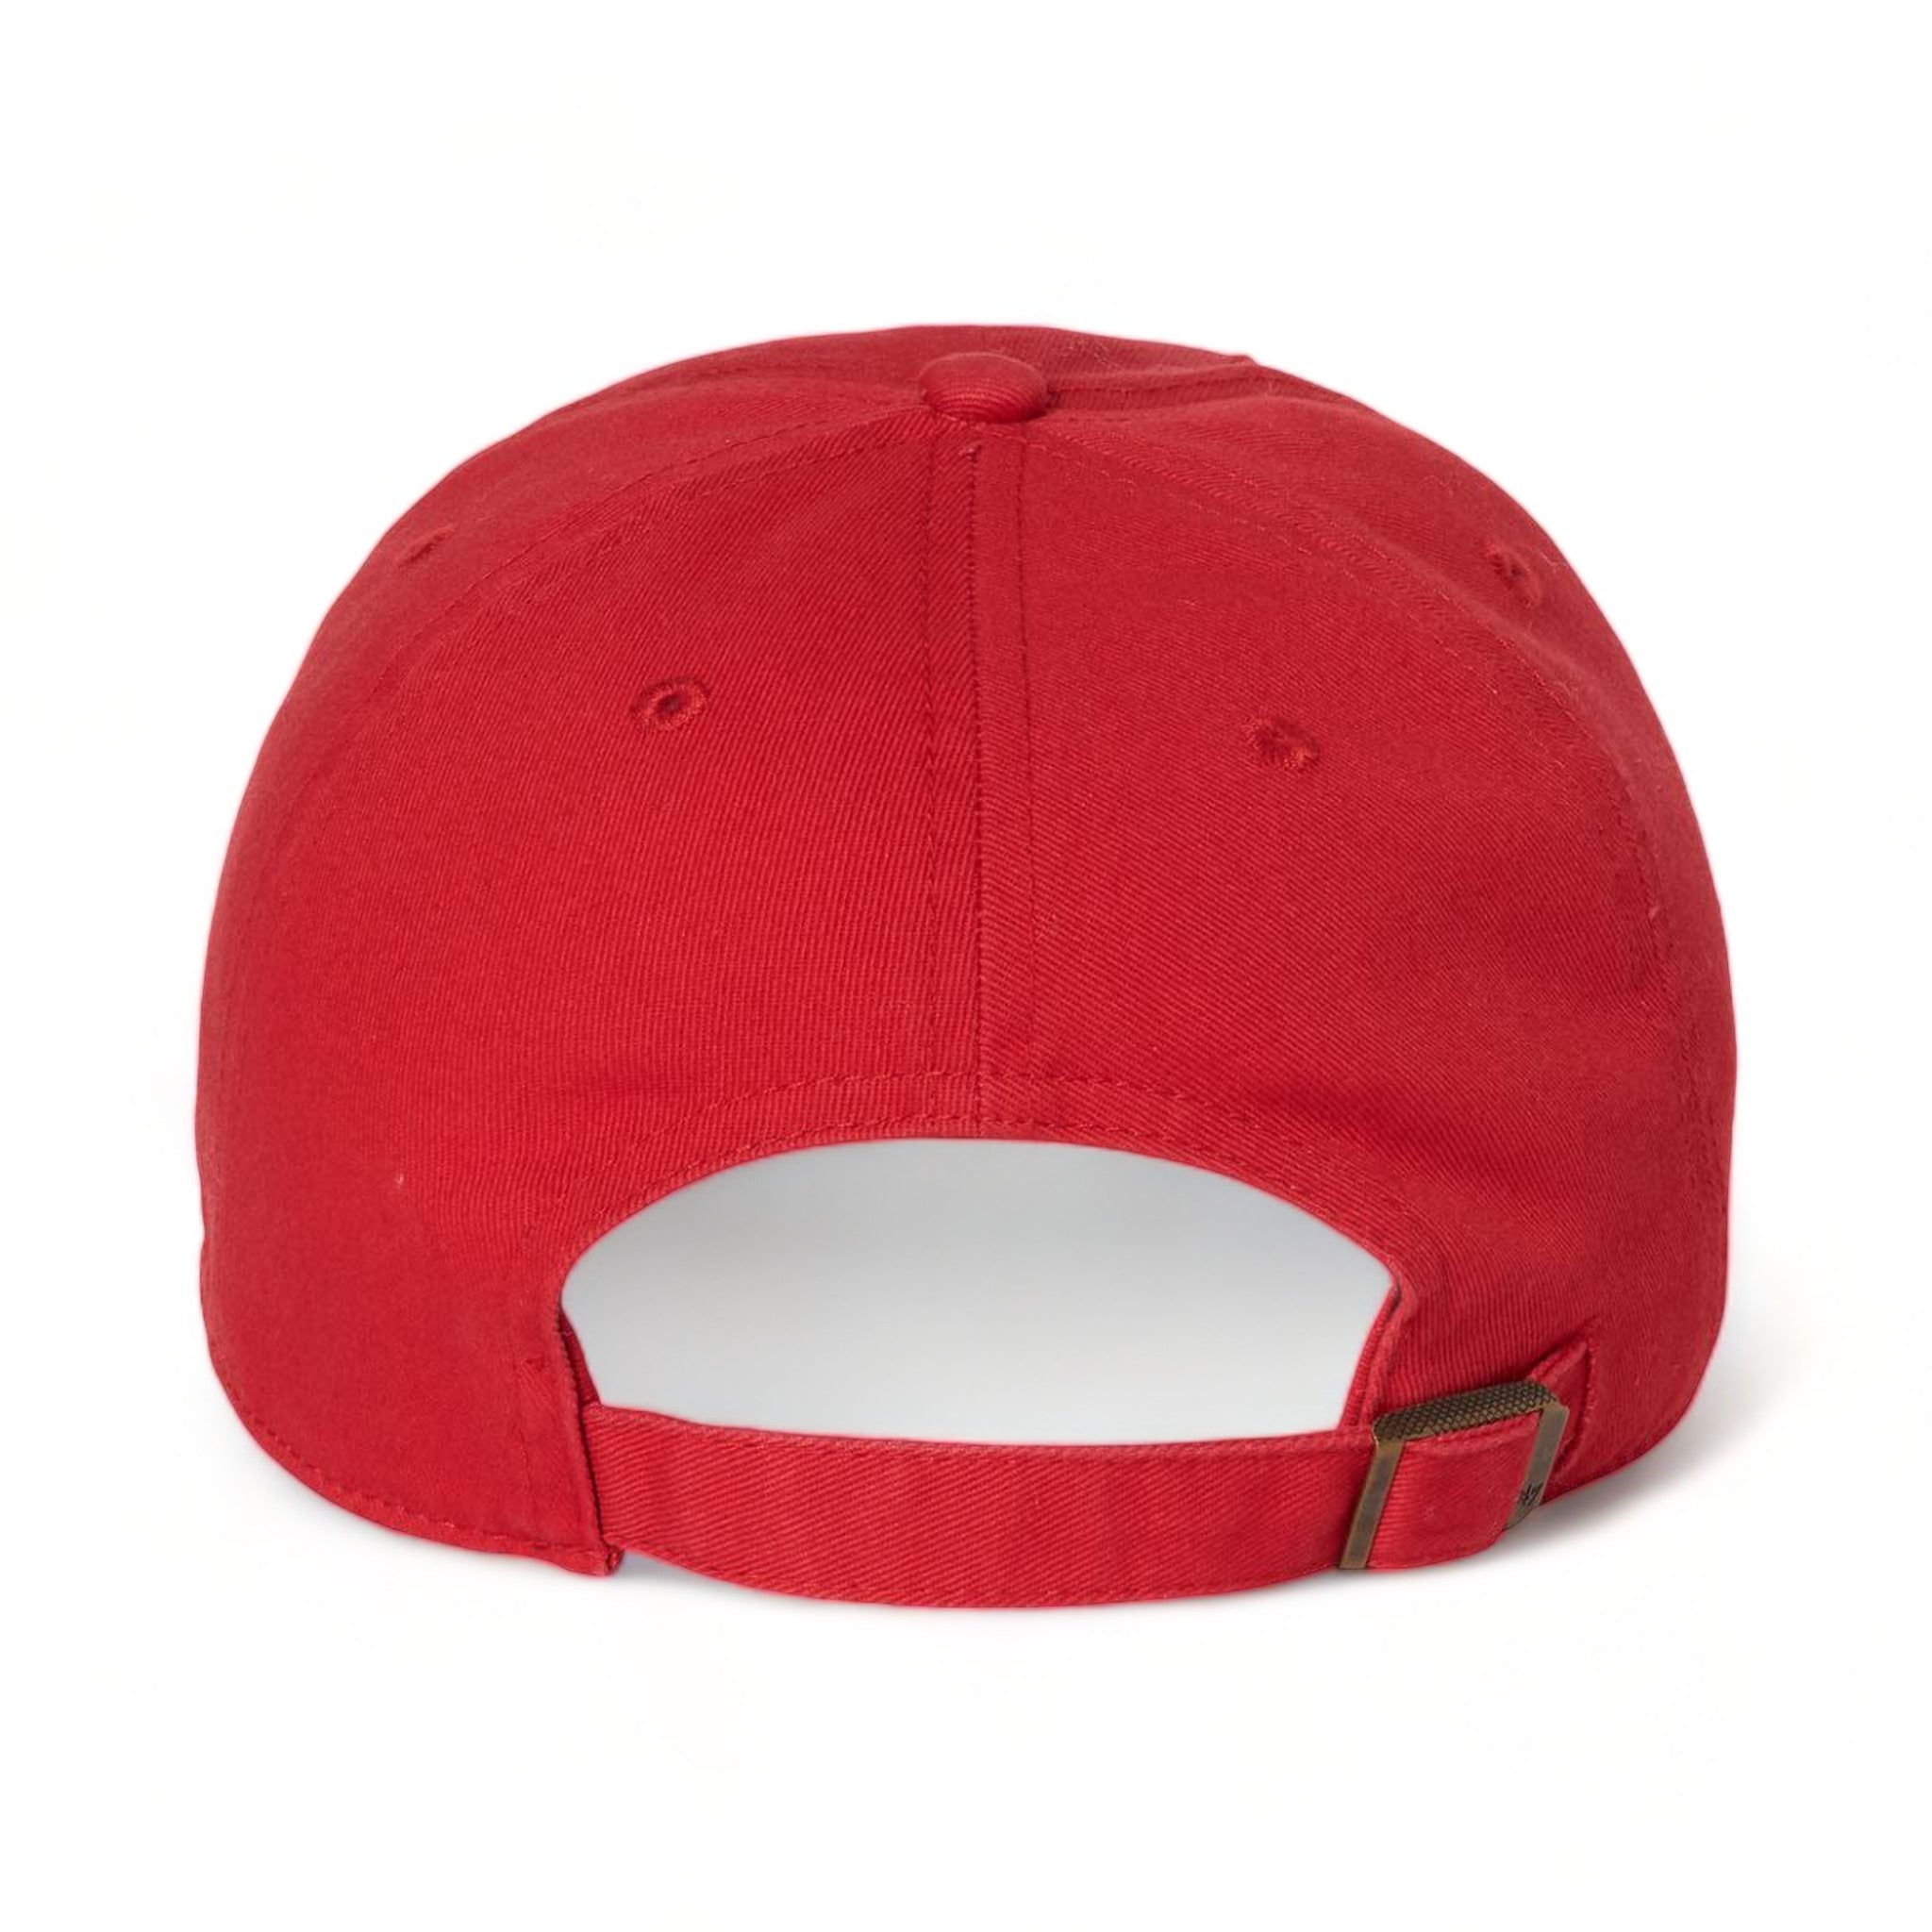 Back view of 47 Brand 4700 custom hat in red